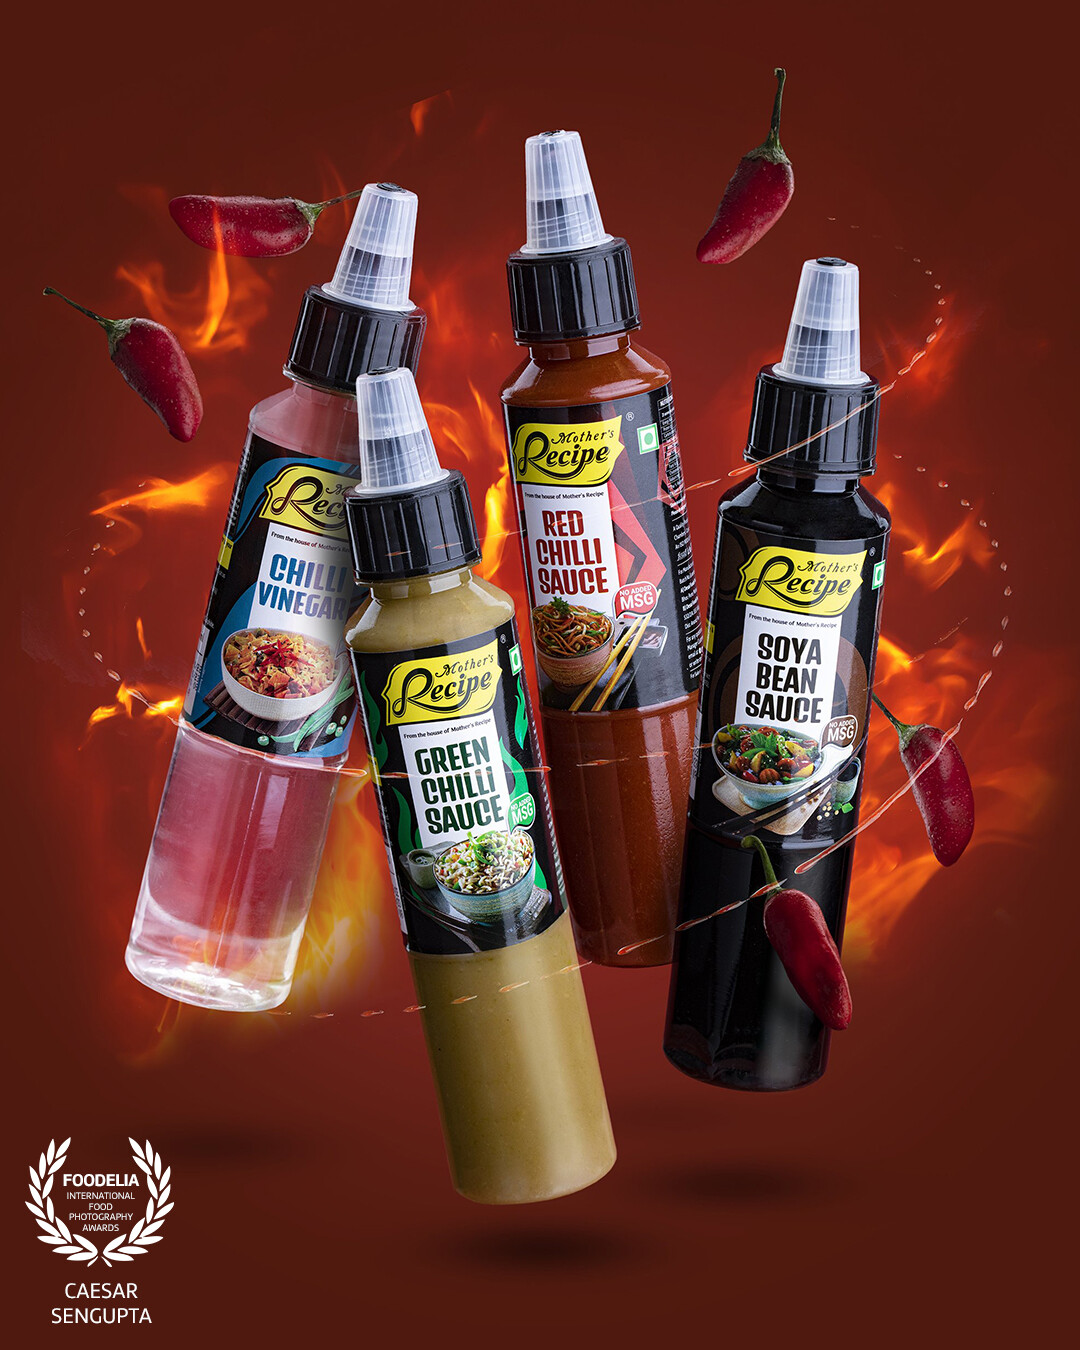 A composite image of the sauce bottles to provide a sense of levitation. Added the fire to bring in the taste of the hot sauces.